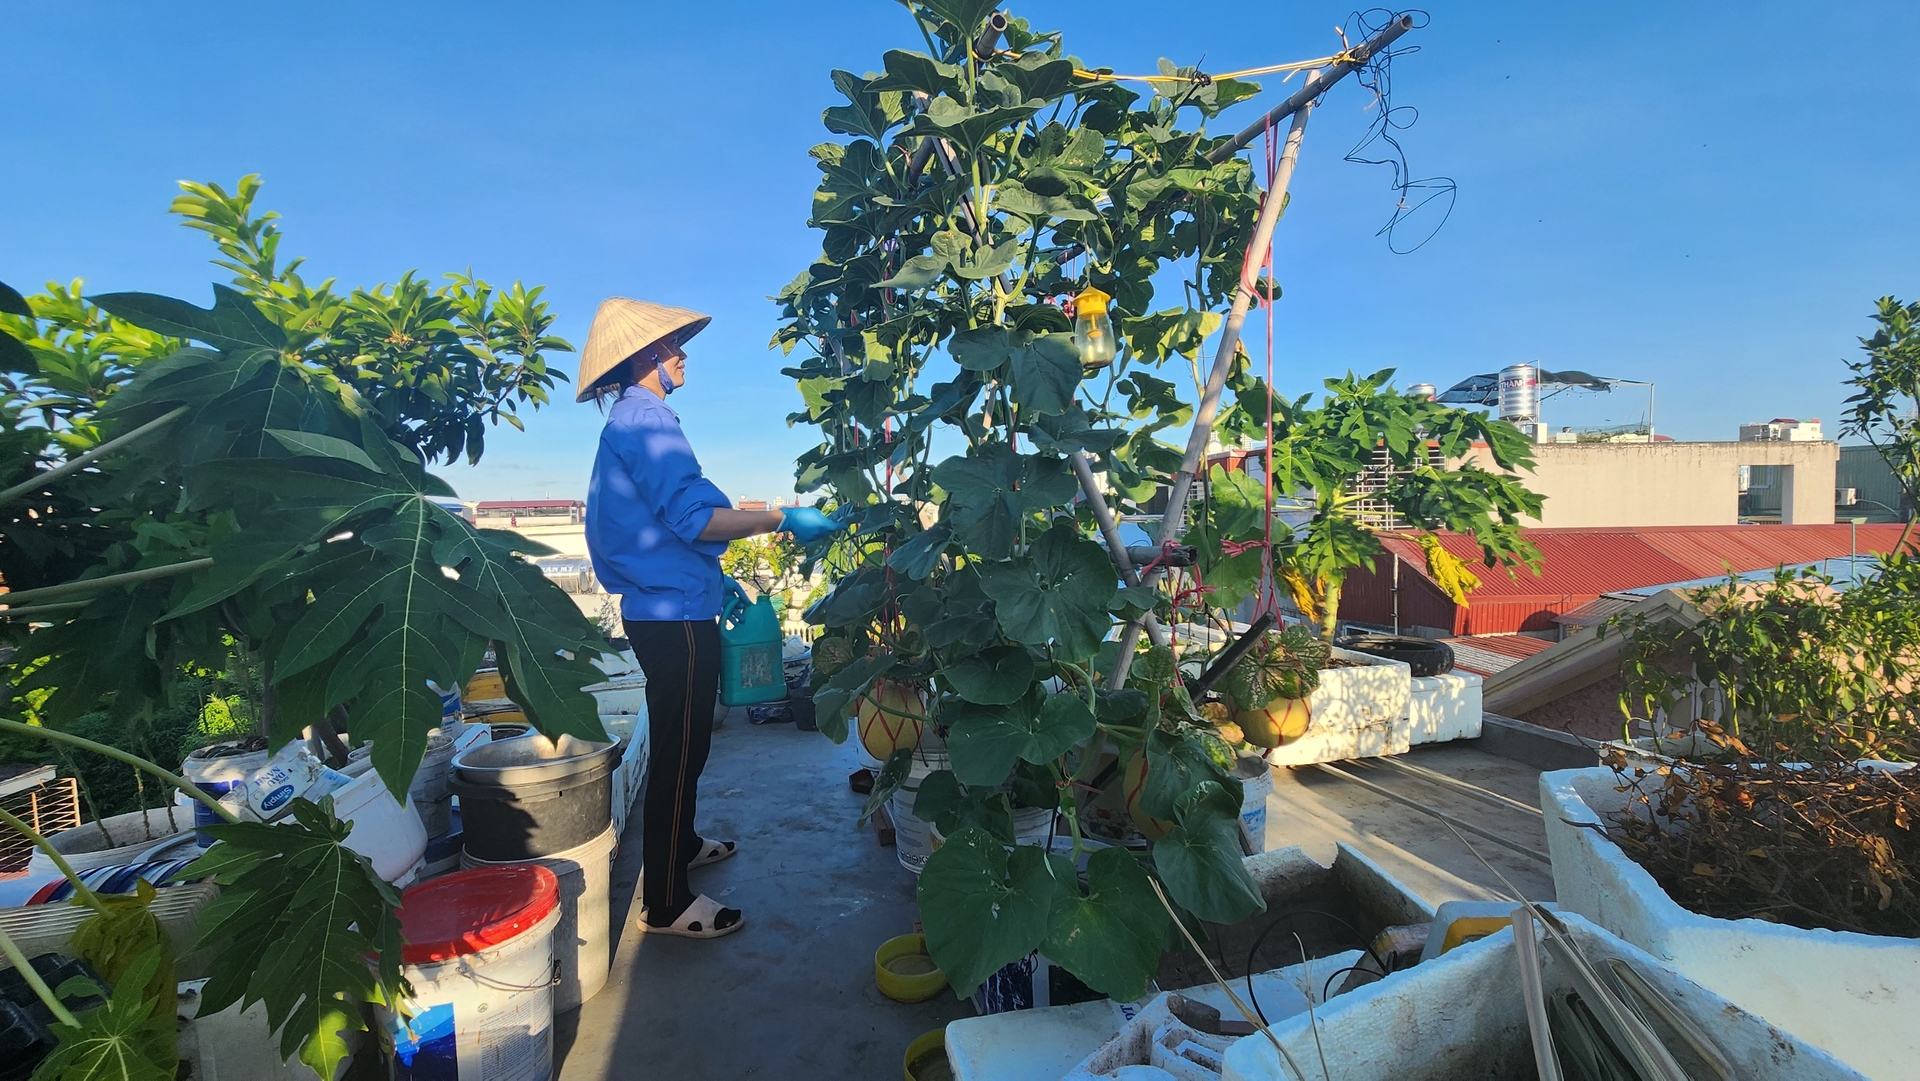 Every day, Ms. Hieu spends 1-2 hours of idle time to water and take care of the vegetable and fruit garden on the terrace. Photo: Dinh Muoi.